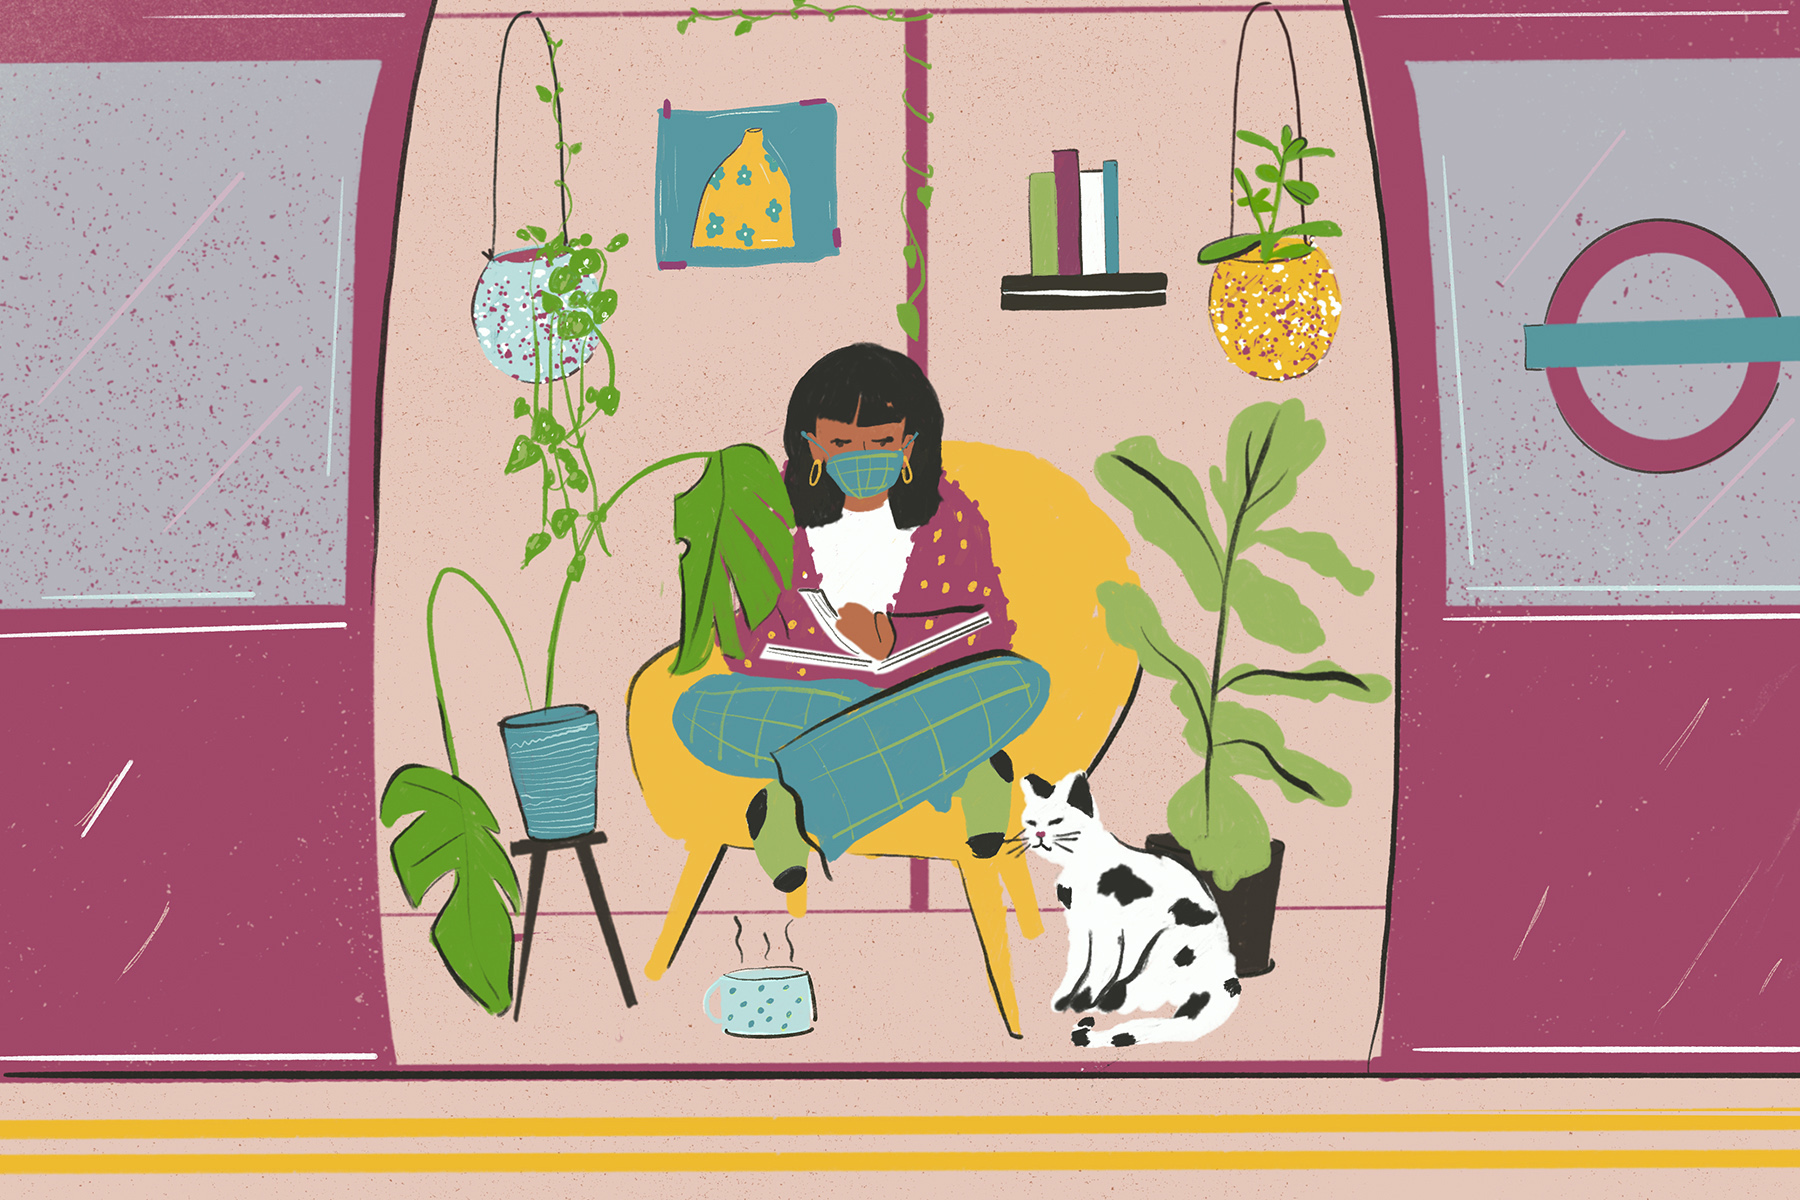 An illustration of a woman reading on a tube carriage, surrounded by plants and pets